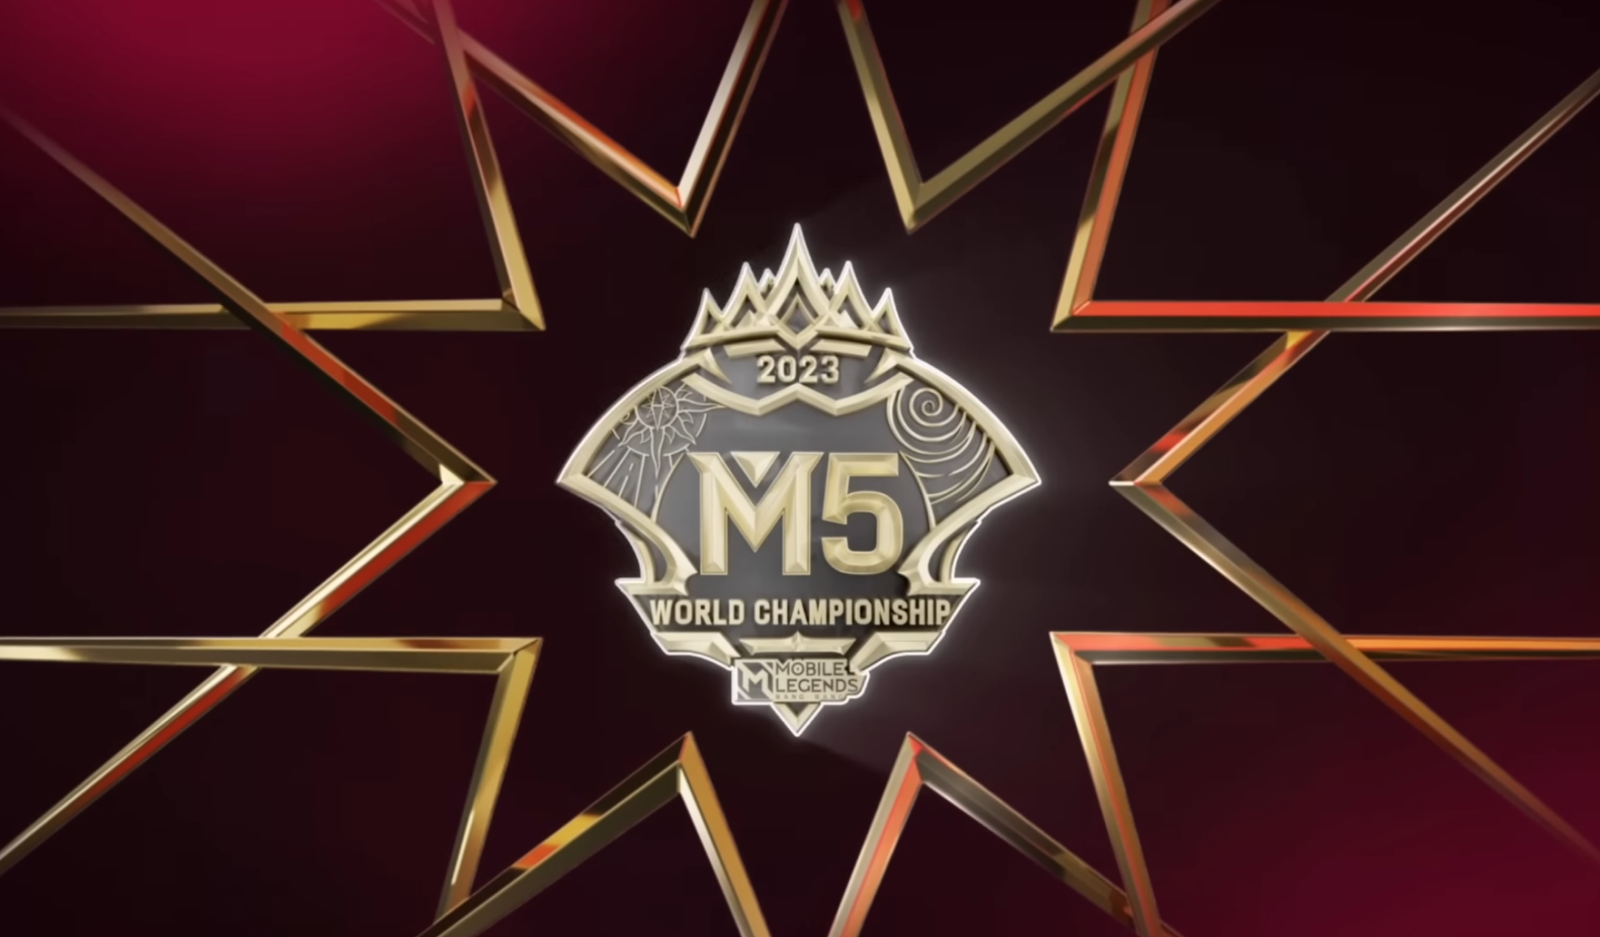 M5 MLBB Championship: The Biggest Mobile Legends Tournament is Coming to the Philippines